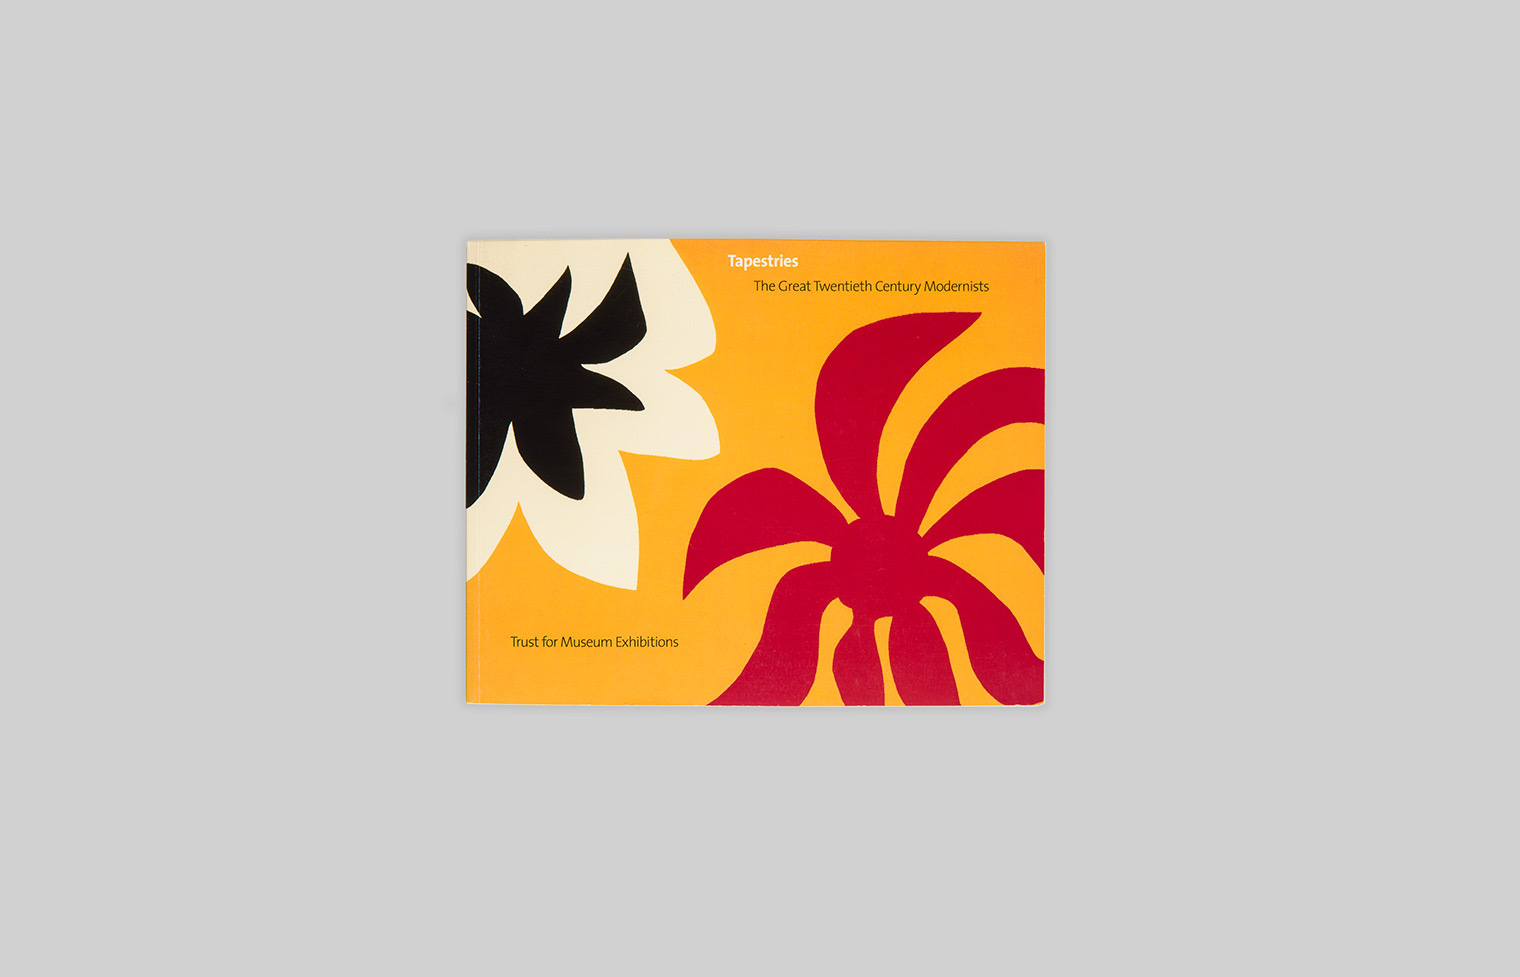 Cover features Alexander Calder’s Soleil Rouge, a red sun over a yellow background with a floral shape in black and beige.